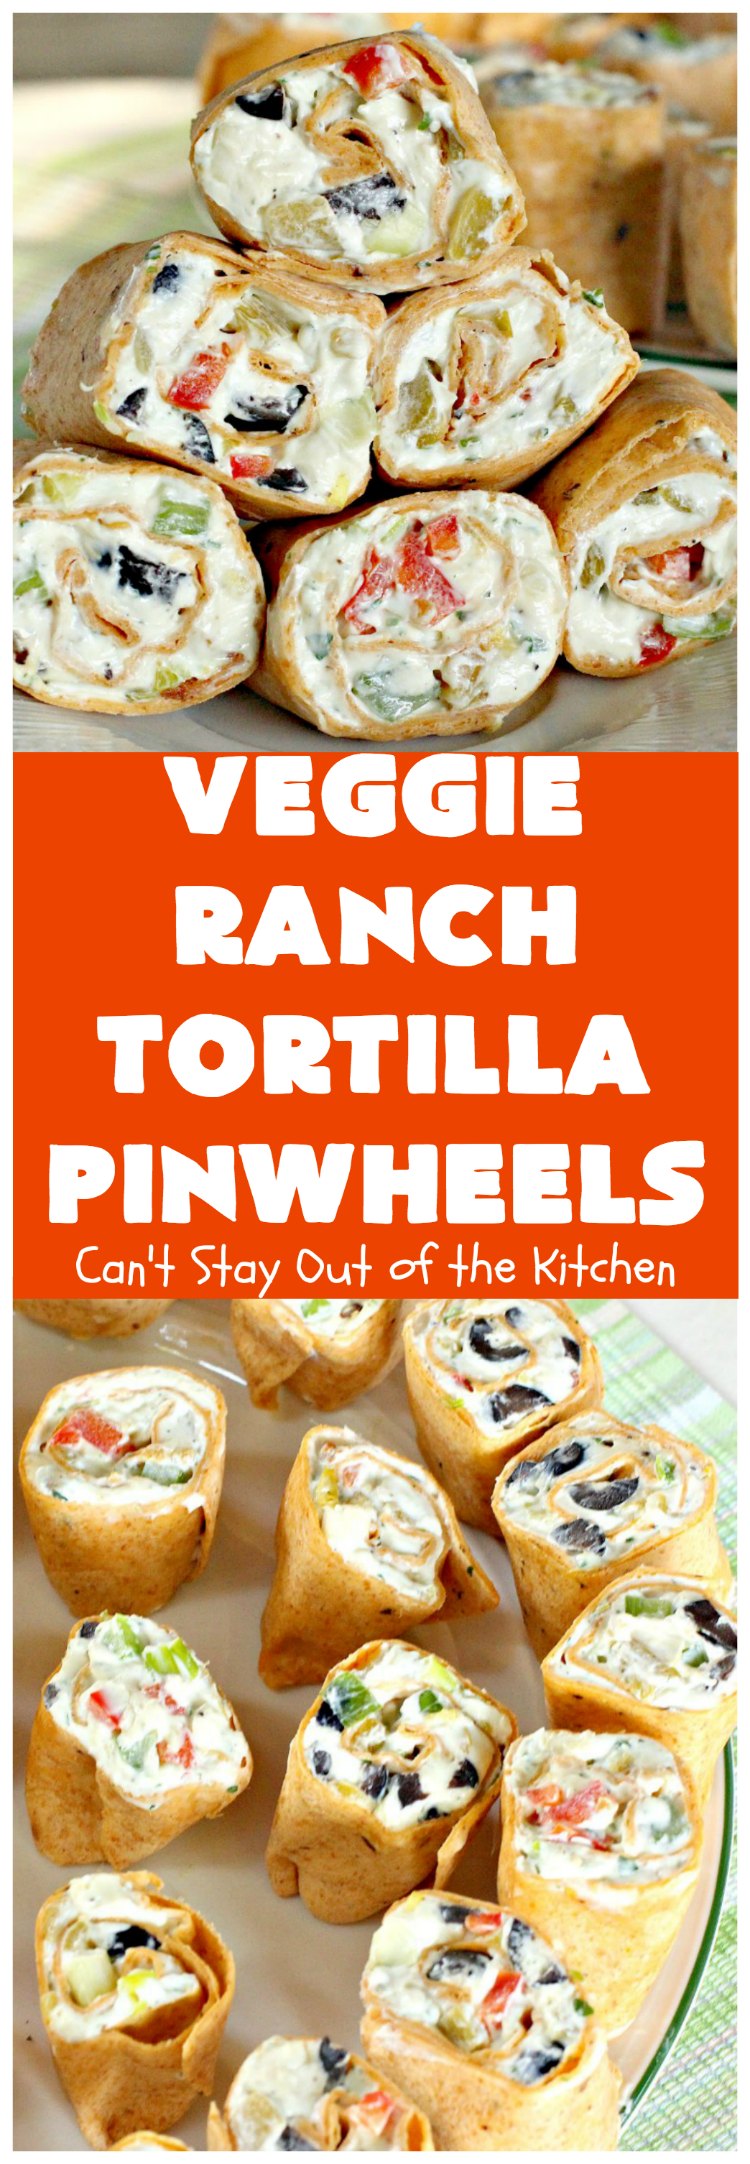 Veggie Ranch Tortilla Pinwheels | Can't Stay Out of the Kitchen